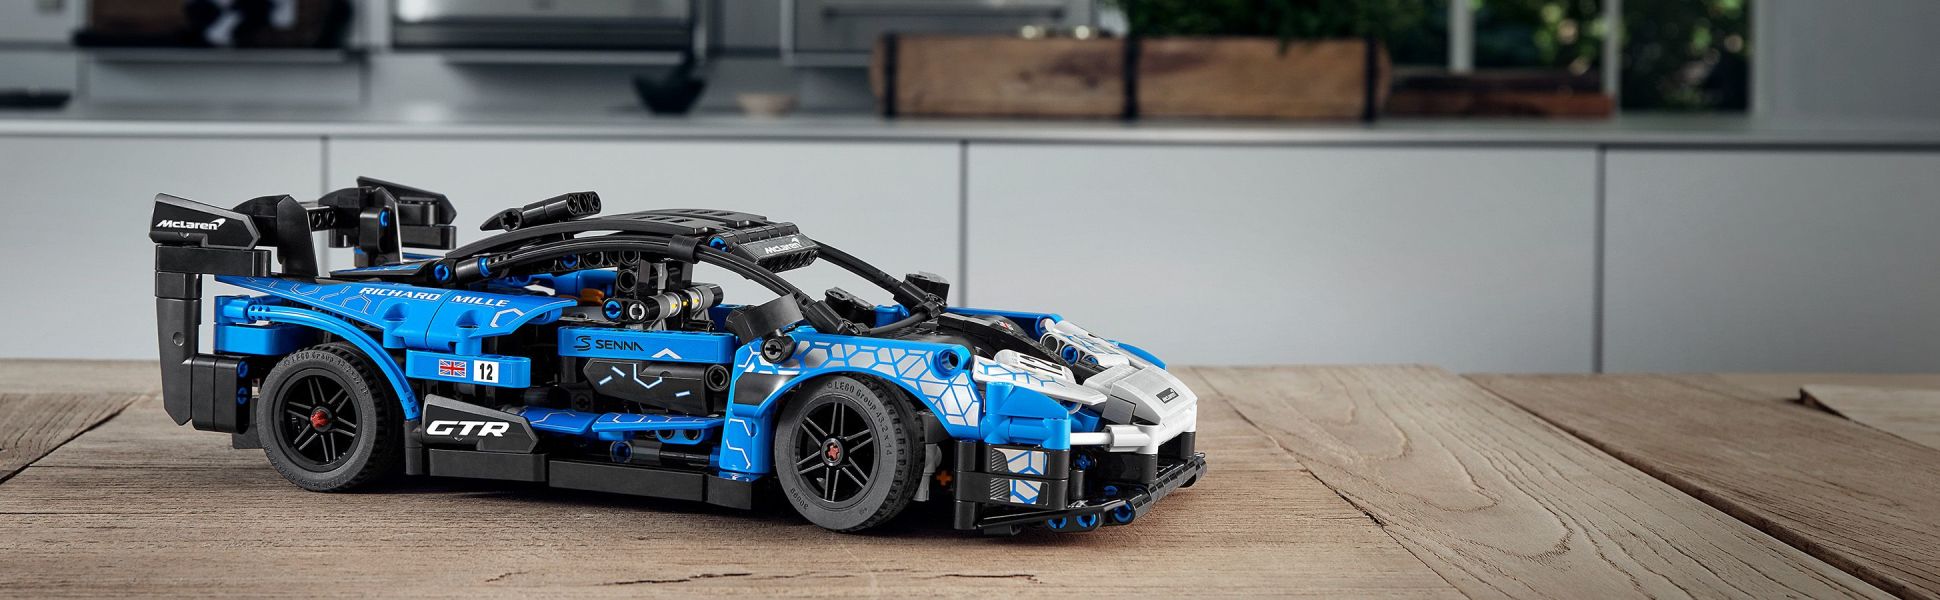  LEGO Technic McLaren Senna GTR 42123 Racing Sports Collectable  Model Car Building Kit, Car Construction Toy, Gift Idea for Kids, Boys and  Girls : Toys & Games